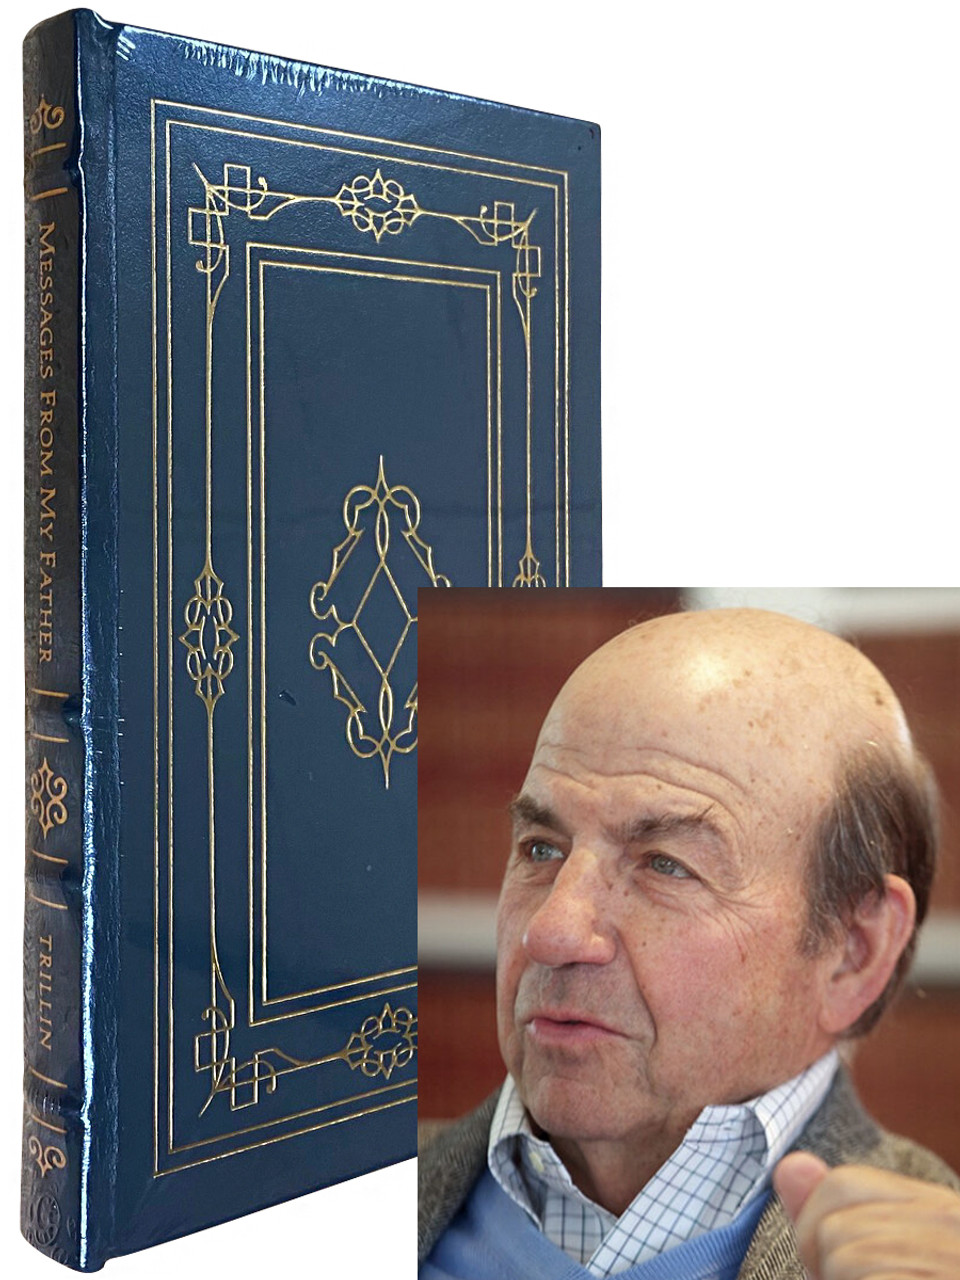 Calvin Trillin "Messages From My Father" Signed First Limited Edition of 1,600 [Sealed]